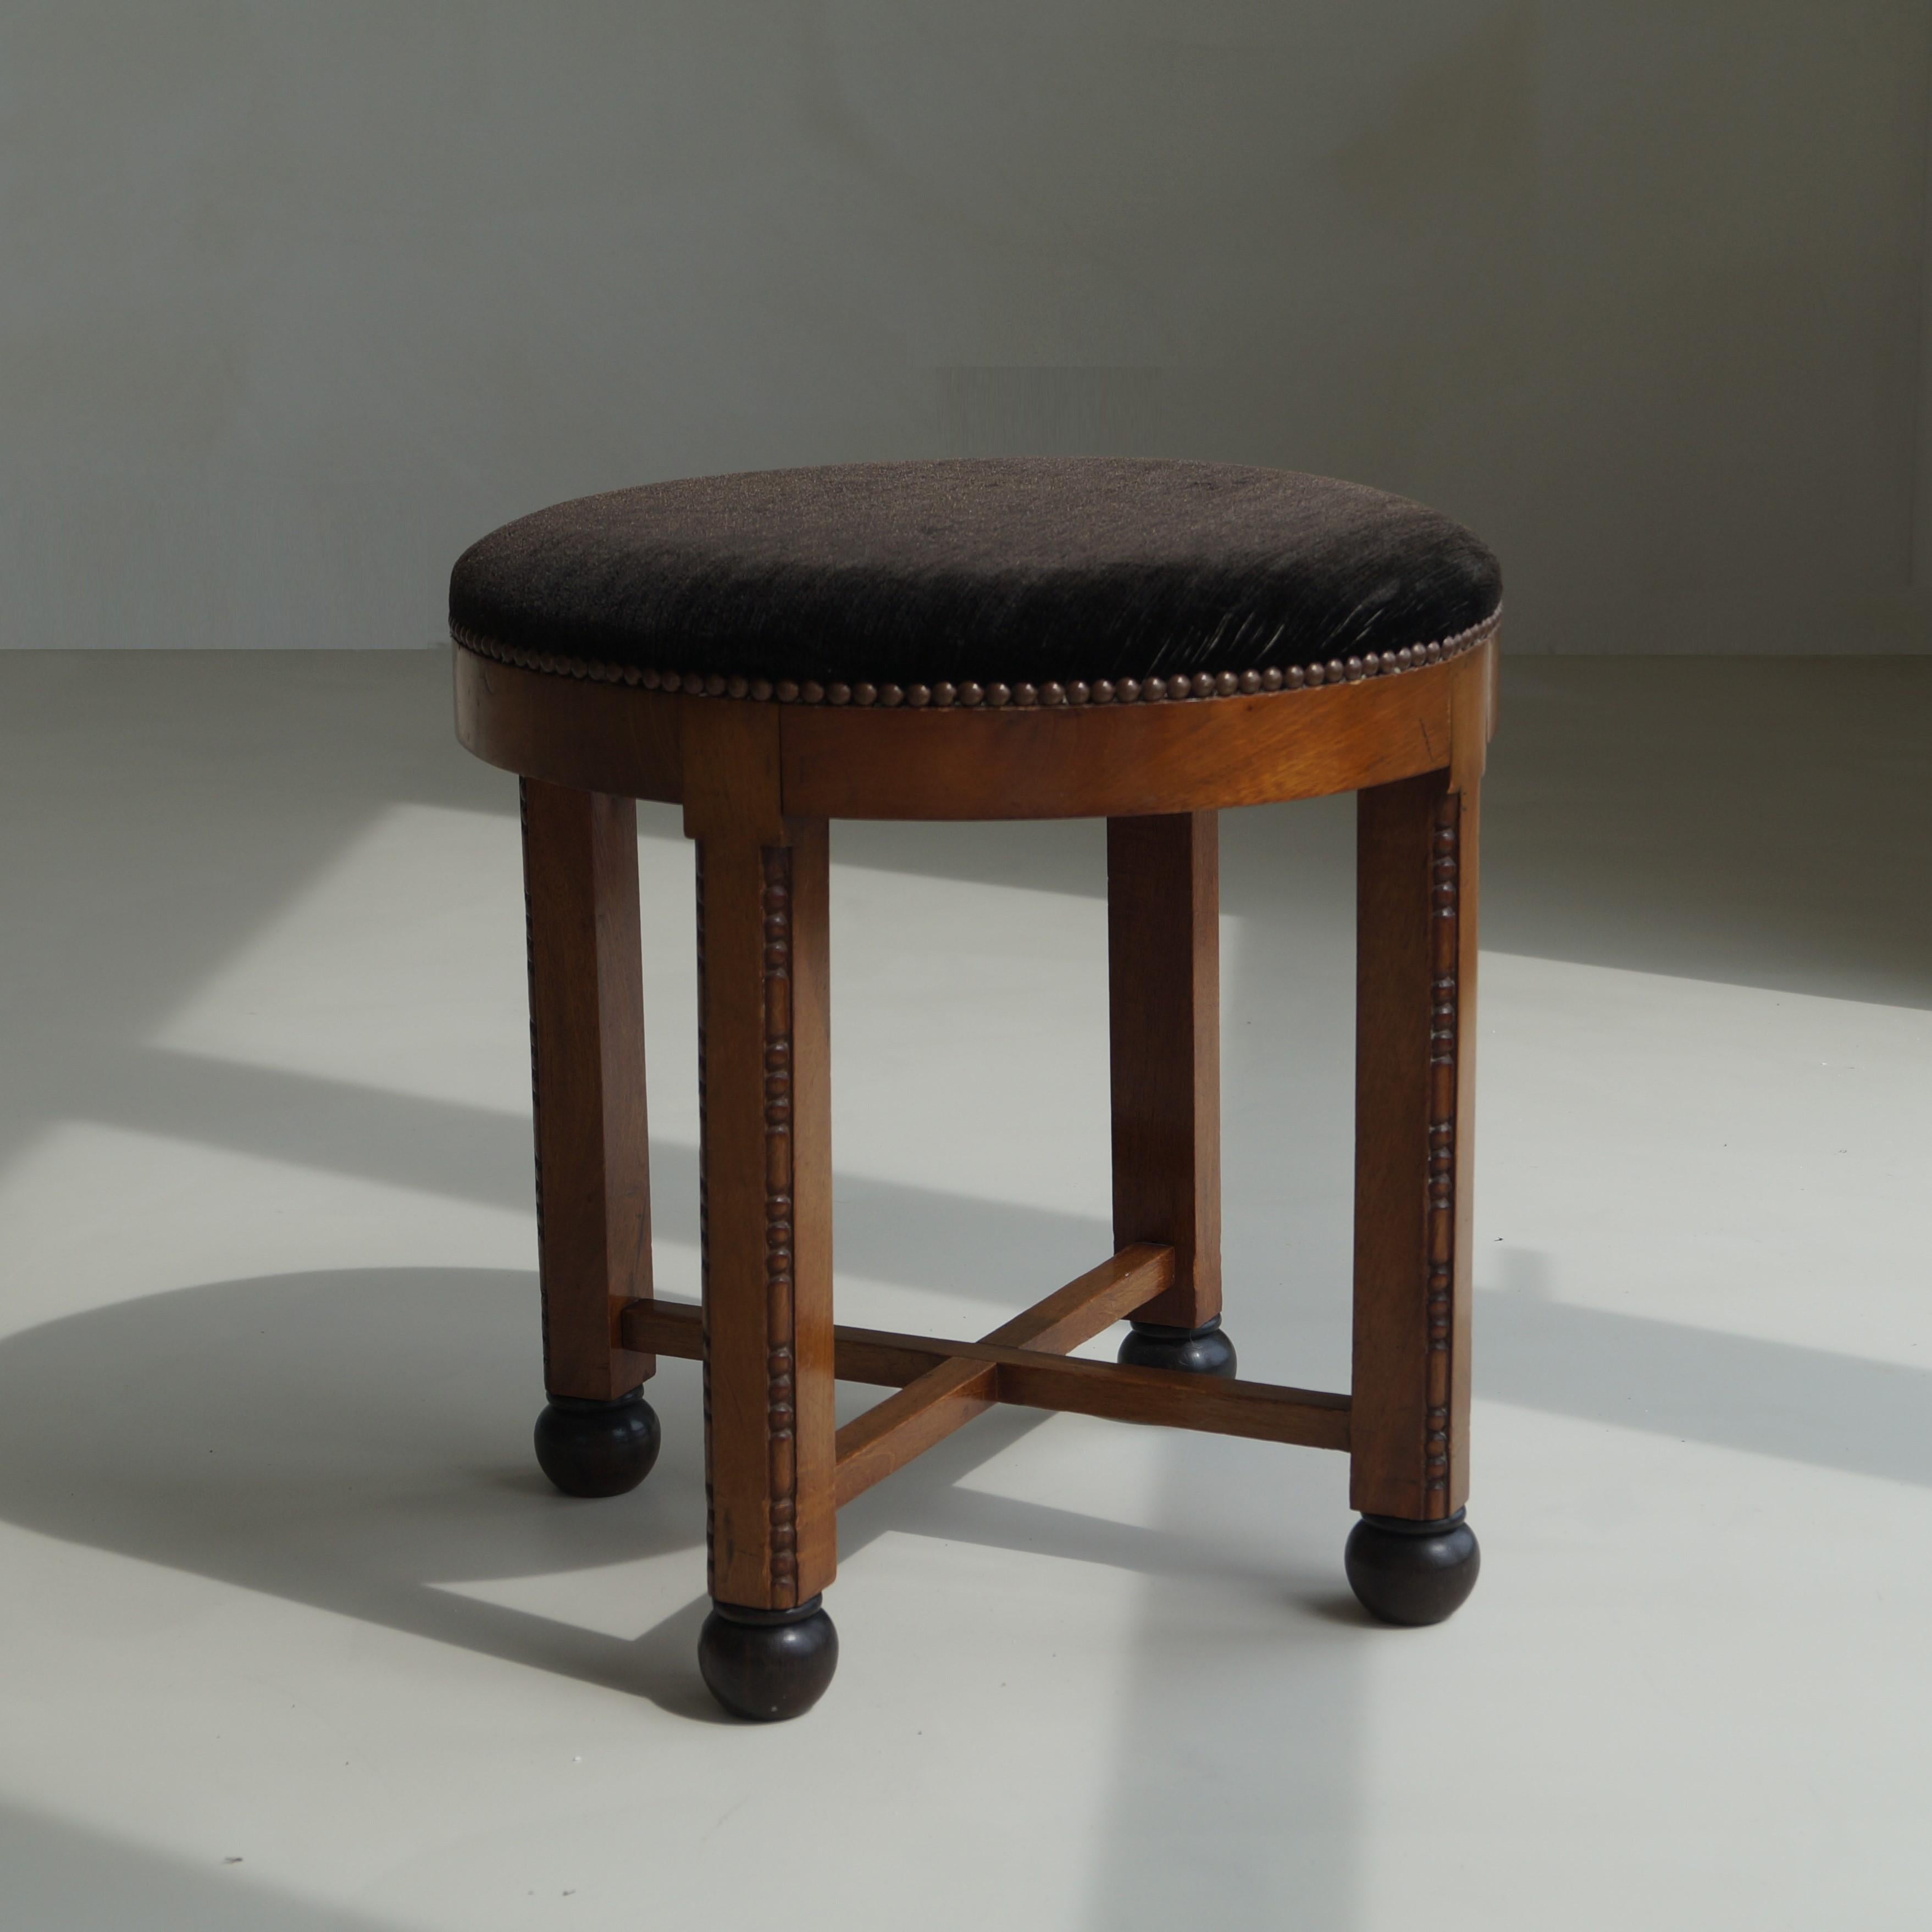 A very decorative original 1930s Amsterdam School stool in walnut with a vintage velvet like upholstery in a dark brown almost black colour. 
The piece has an unusual design because of the rather large seat, which has the same width as the height of